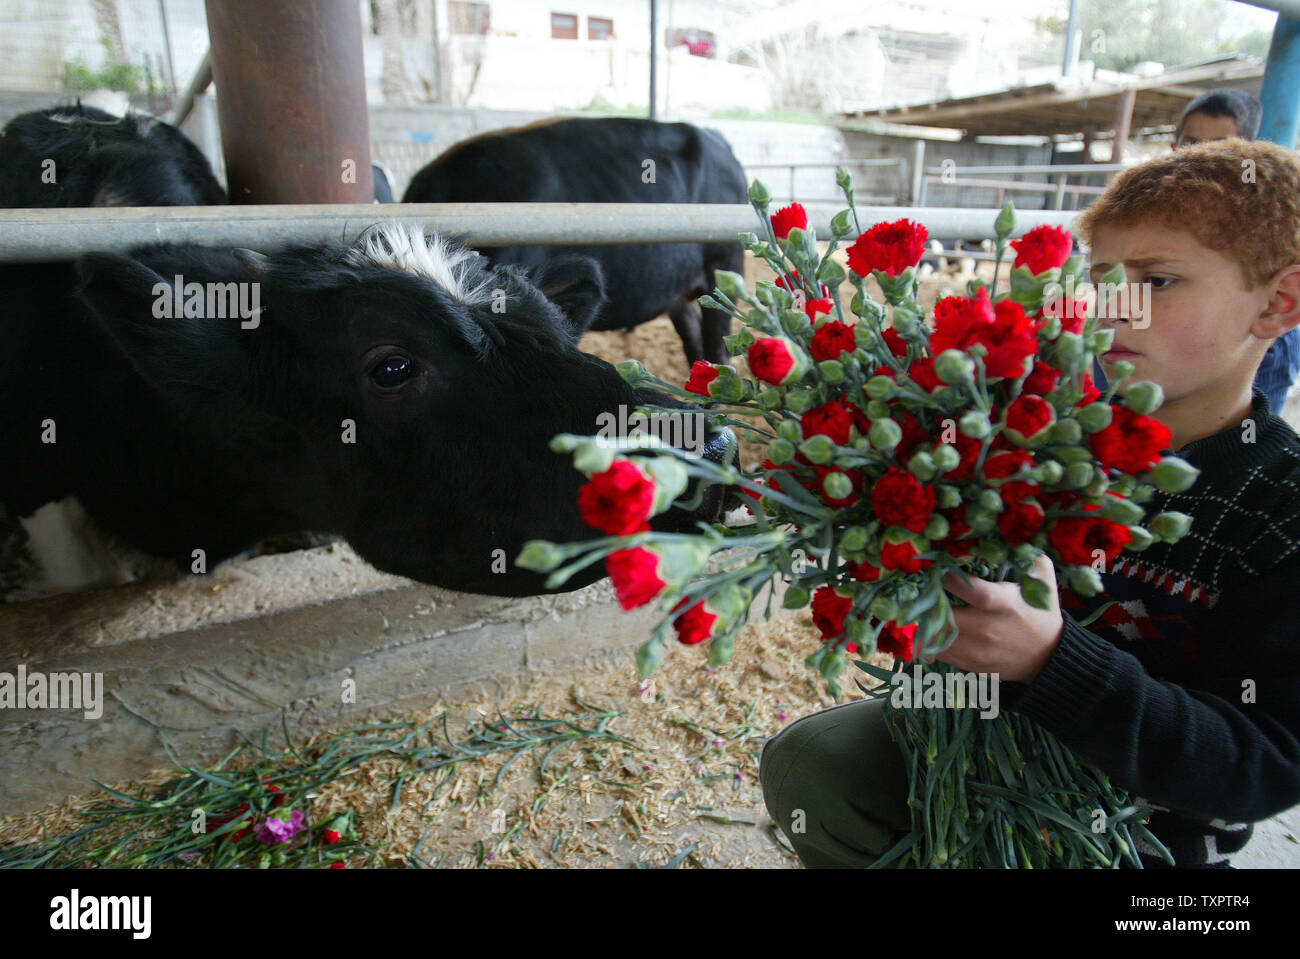 A Palestinian boy feeds flowers to cows on a farm in southern Gaza on February 14, 2008. Palestinians in Gaza, unable to ship their flowers to Europe for Valentine's Day because of Israeli export restrictions, dumped two truckloads of flowers at the Sufa border crossing with the Jewish state on Thursday and fed some of the crop to livestock. (UPI Photo/Ismael Mohamad) Stock Photo